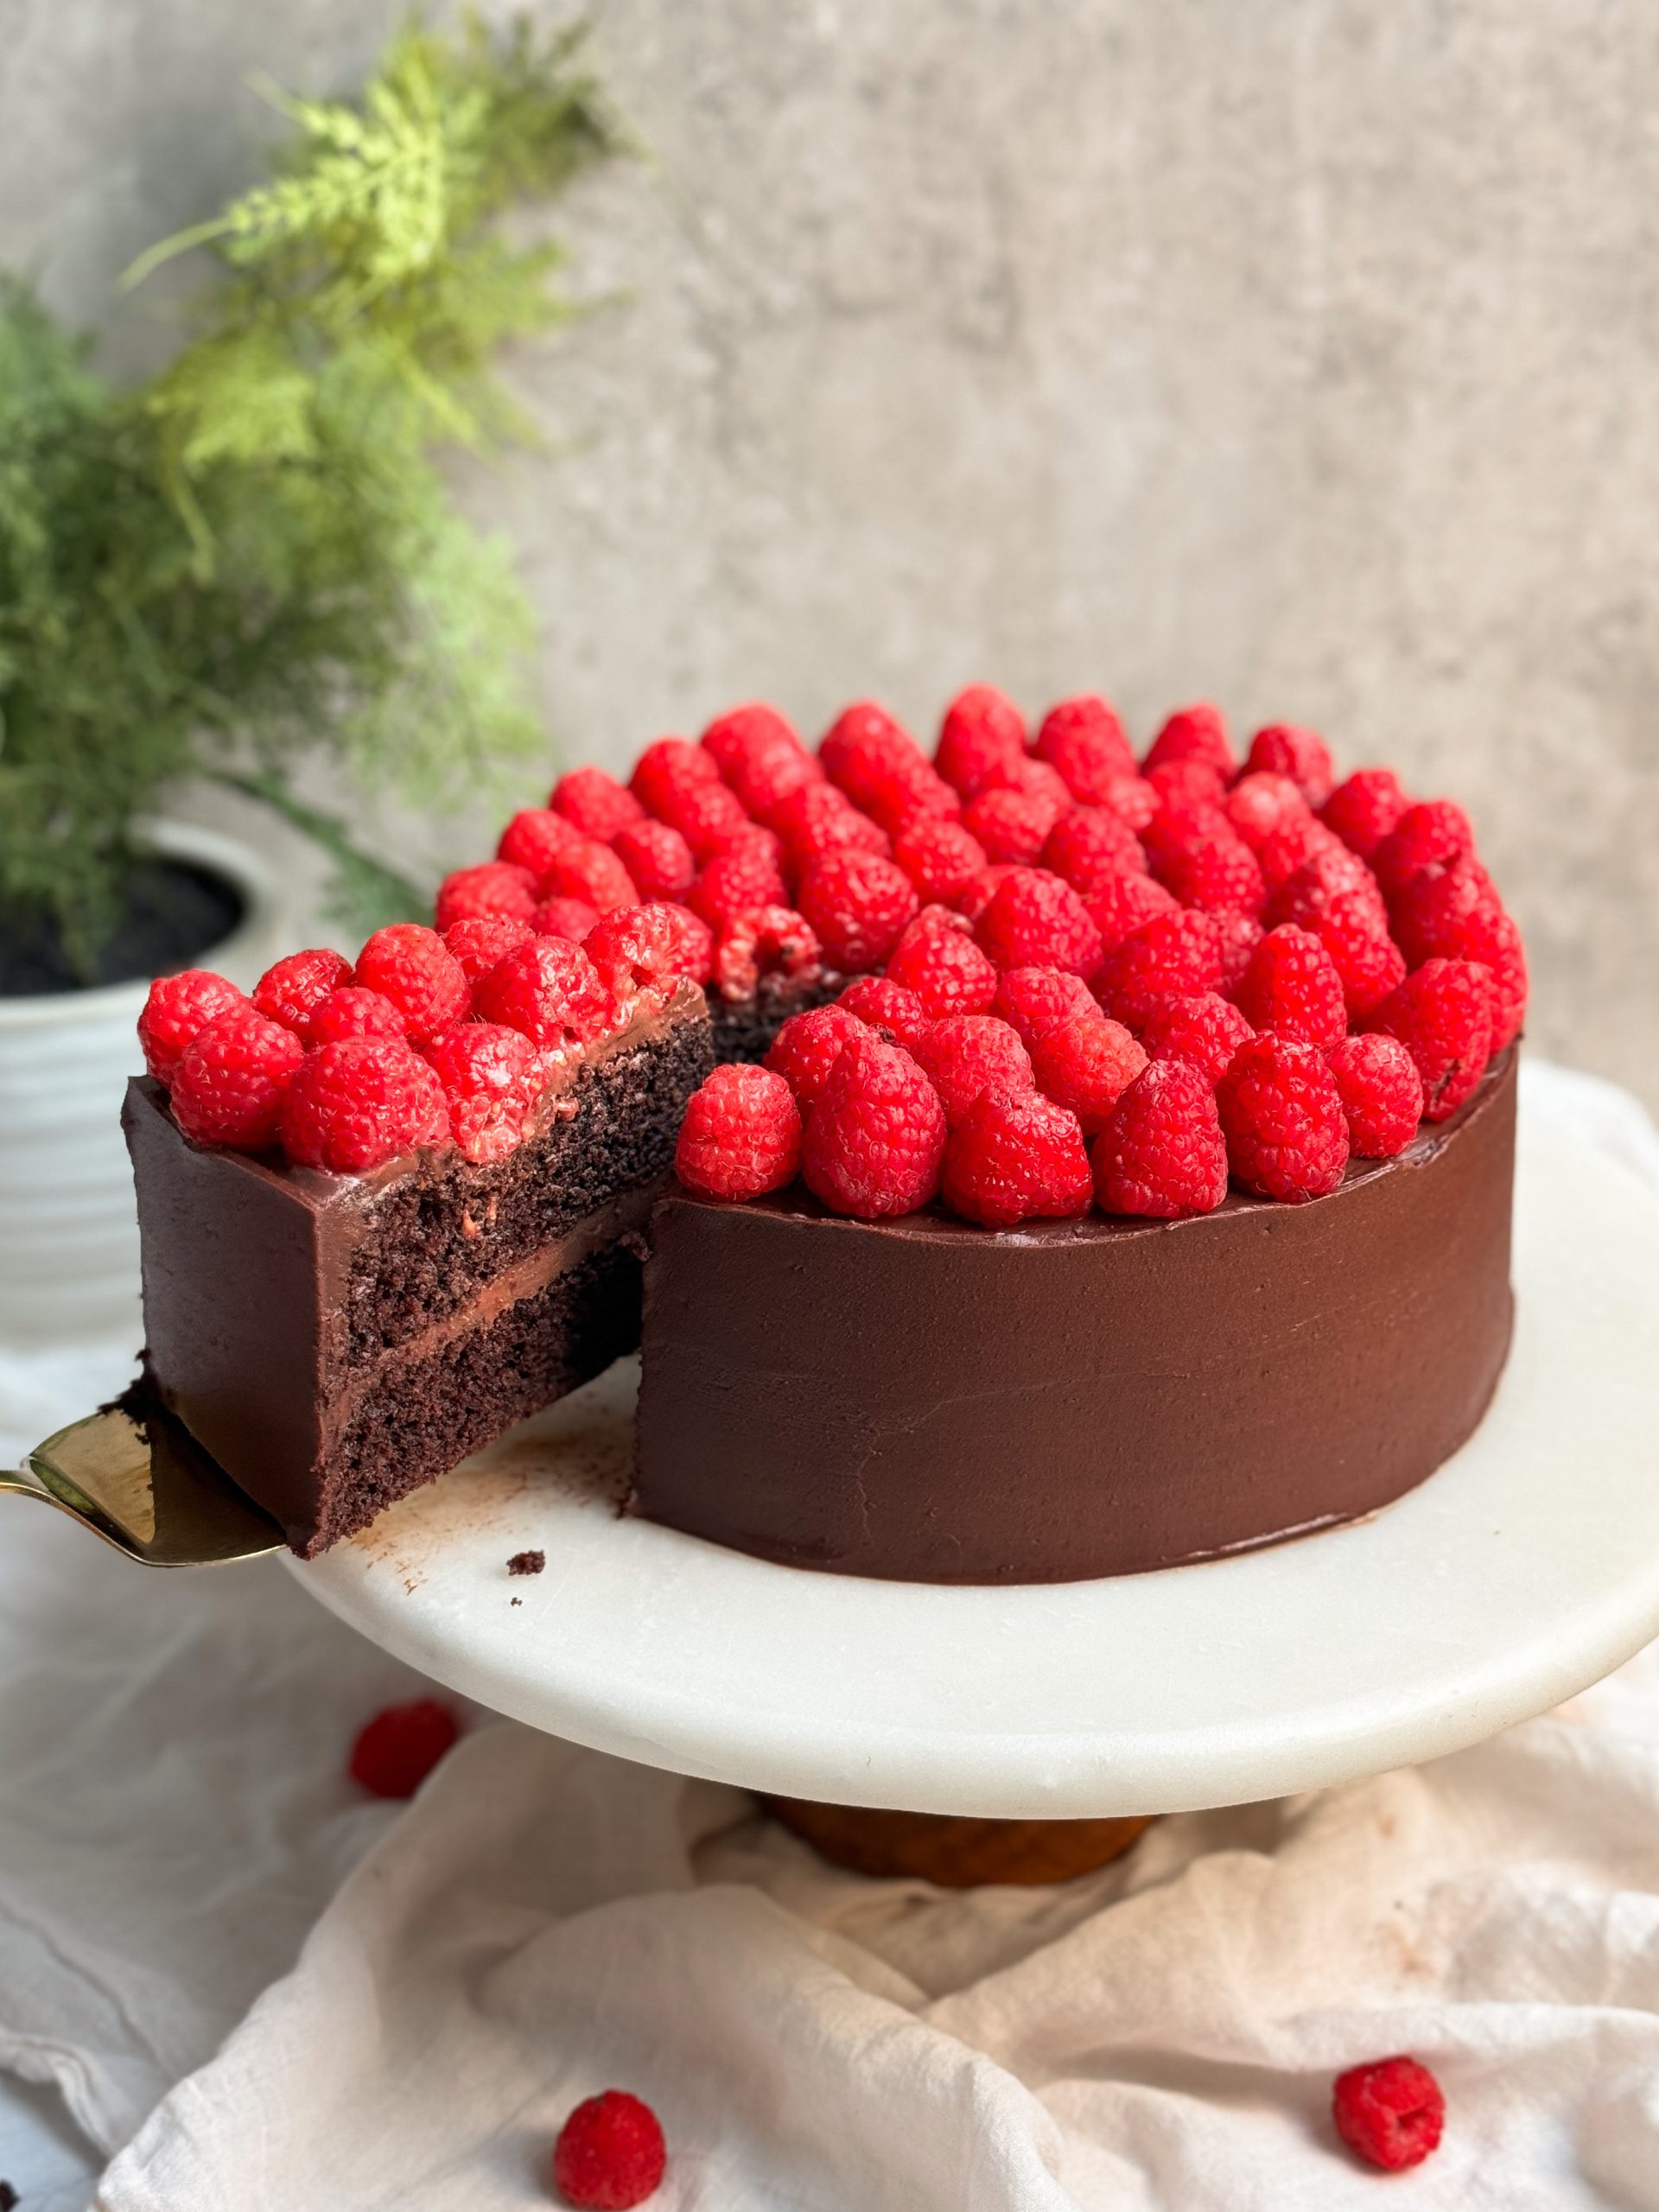 Chocolate raspberry fudge cake on a marble serving board with a spatula pulling out a slice revealing moist chocolatey interior, chocolate ganache, and layer of raspberries on top